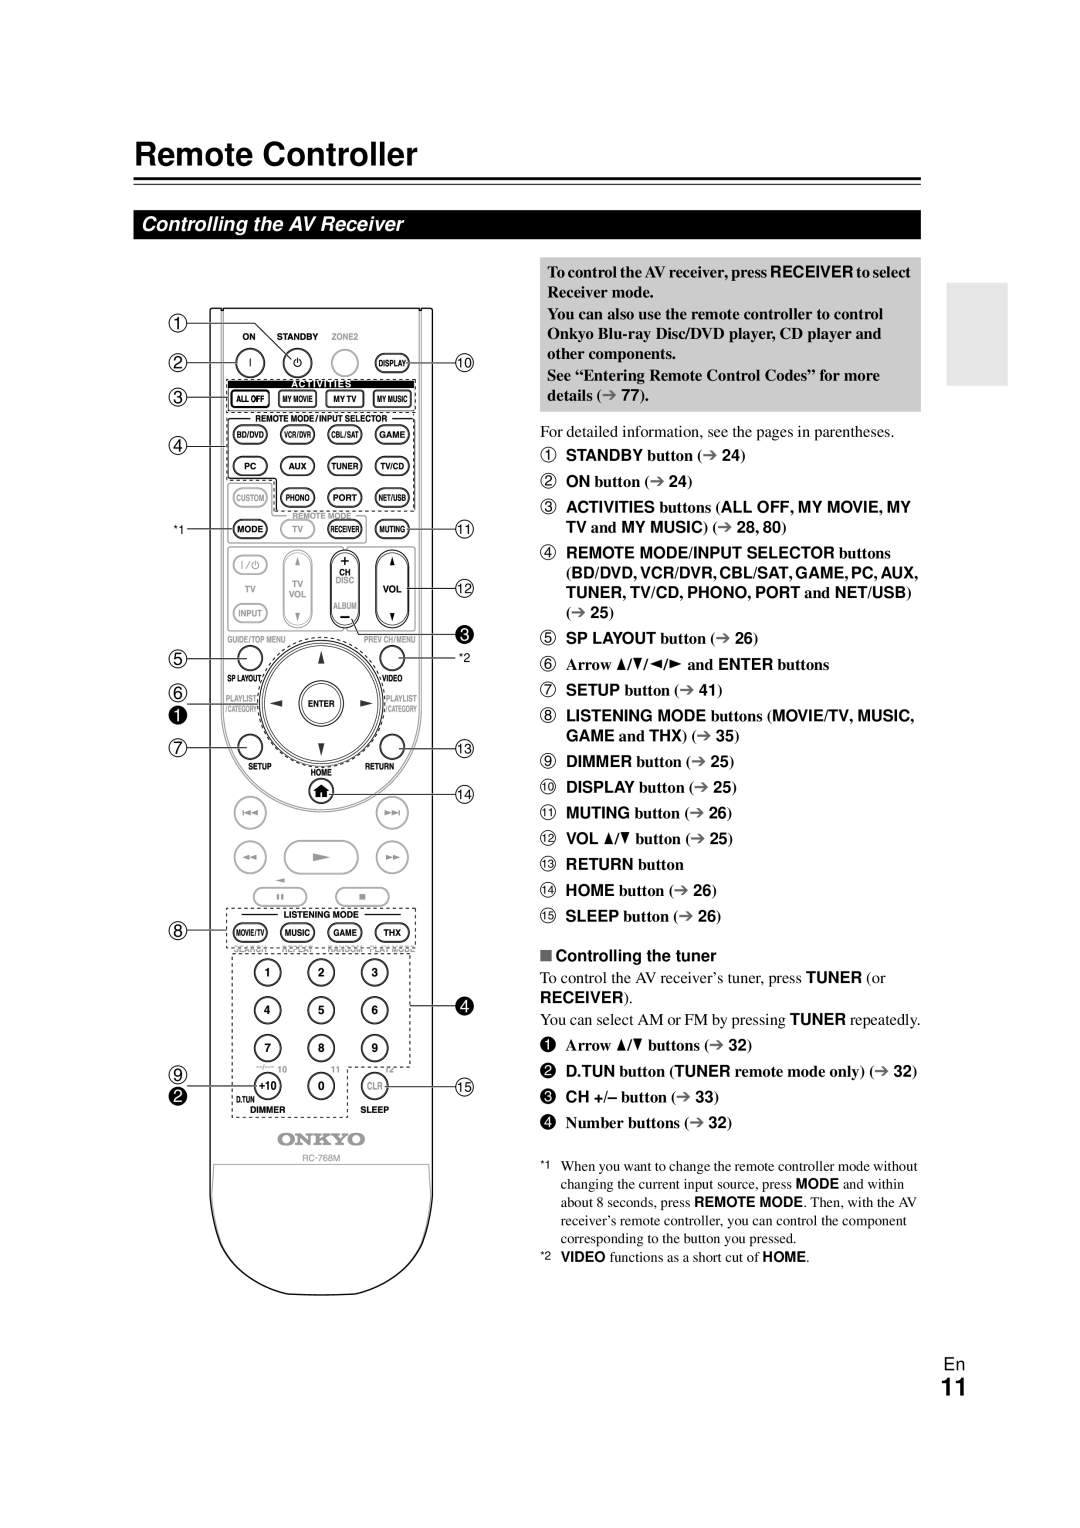 Onkyo HT-RC270 instruction manual Remote Controller, Controlling the AV Receiver 